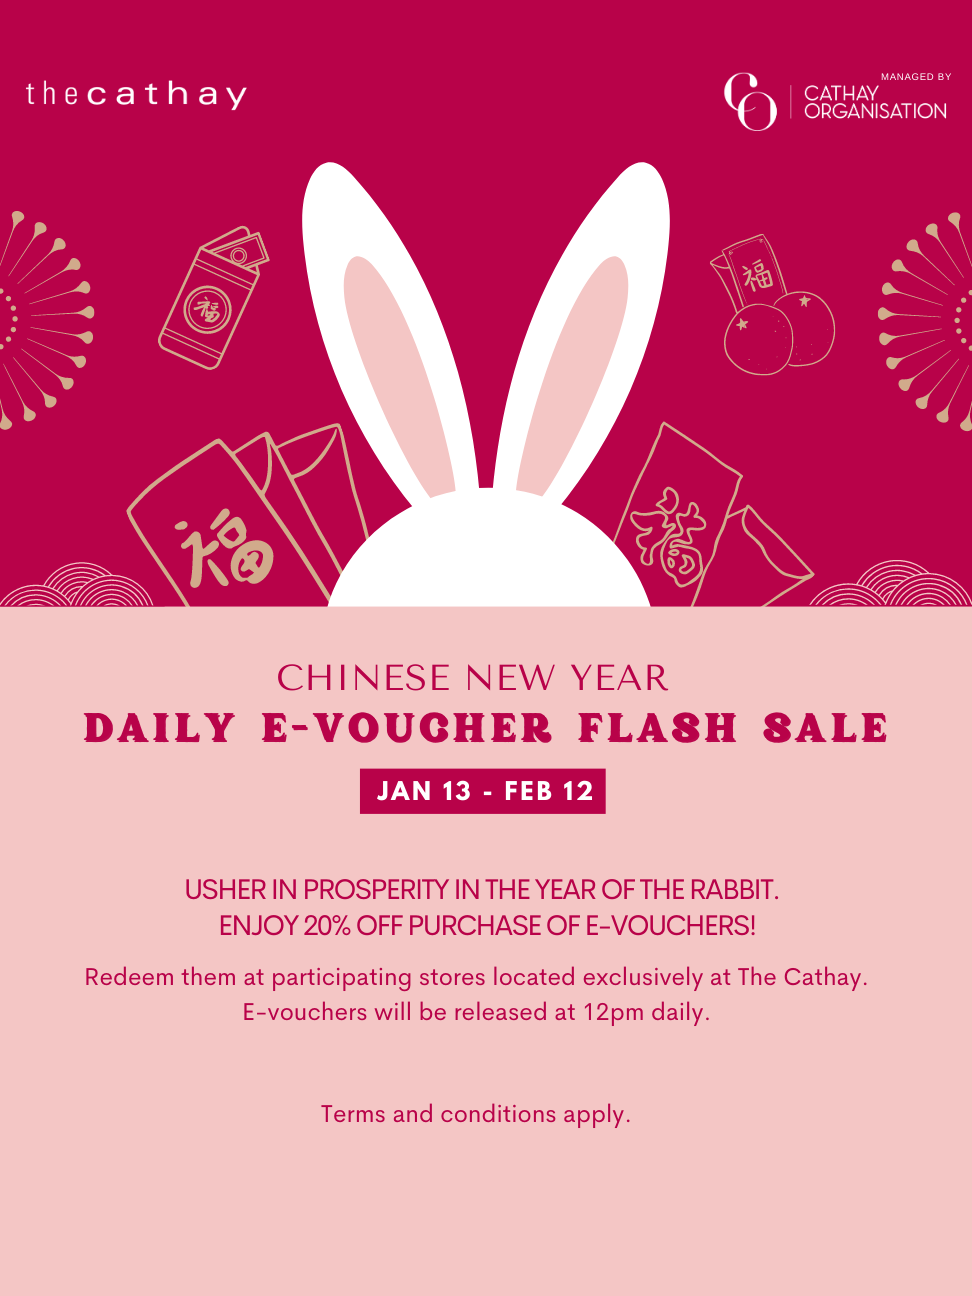 Chinese New Year Daily E-Voucher Flash Sale – The Cathay Mall Exclusive